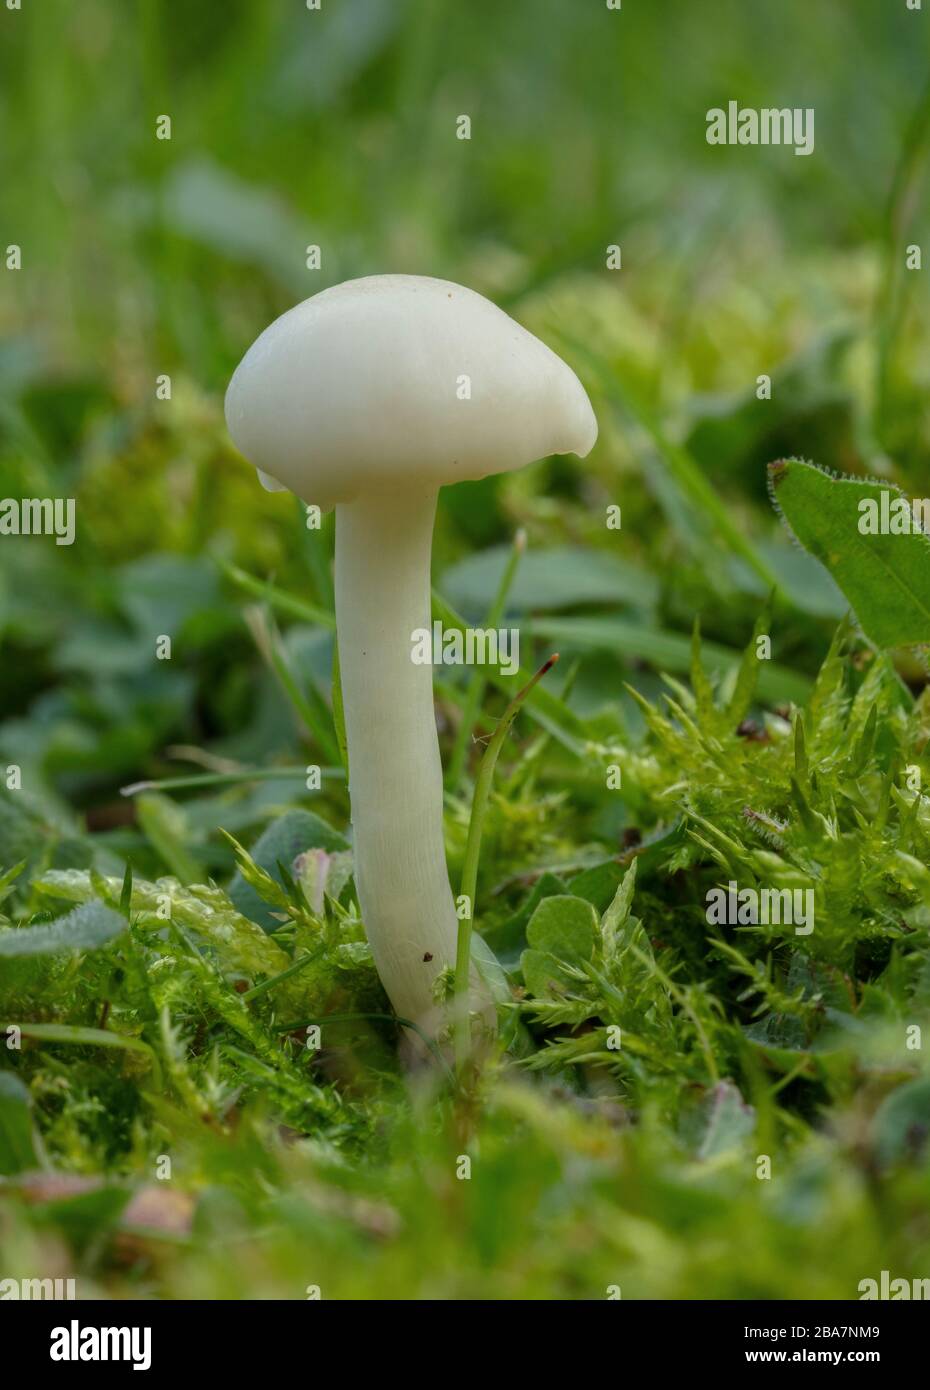 Snowy Waxcap, Cuphophyllus virgineus, growing in old grassland in a churchyard, Wiltshire. Stock Photo